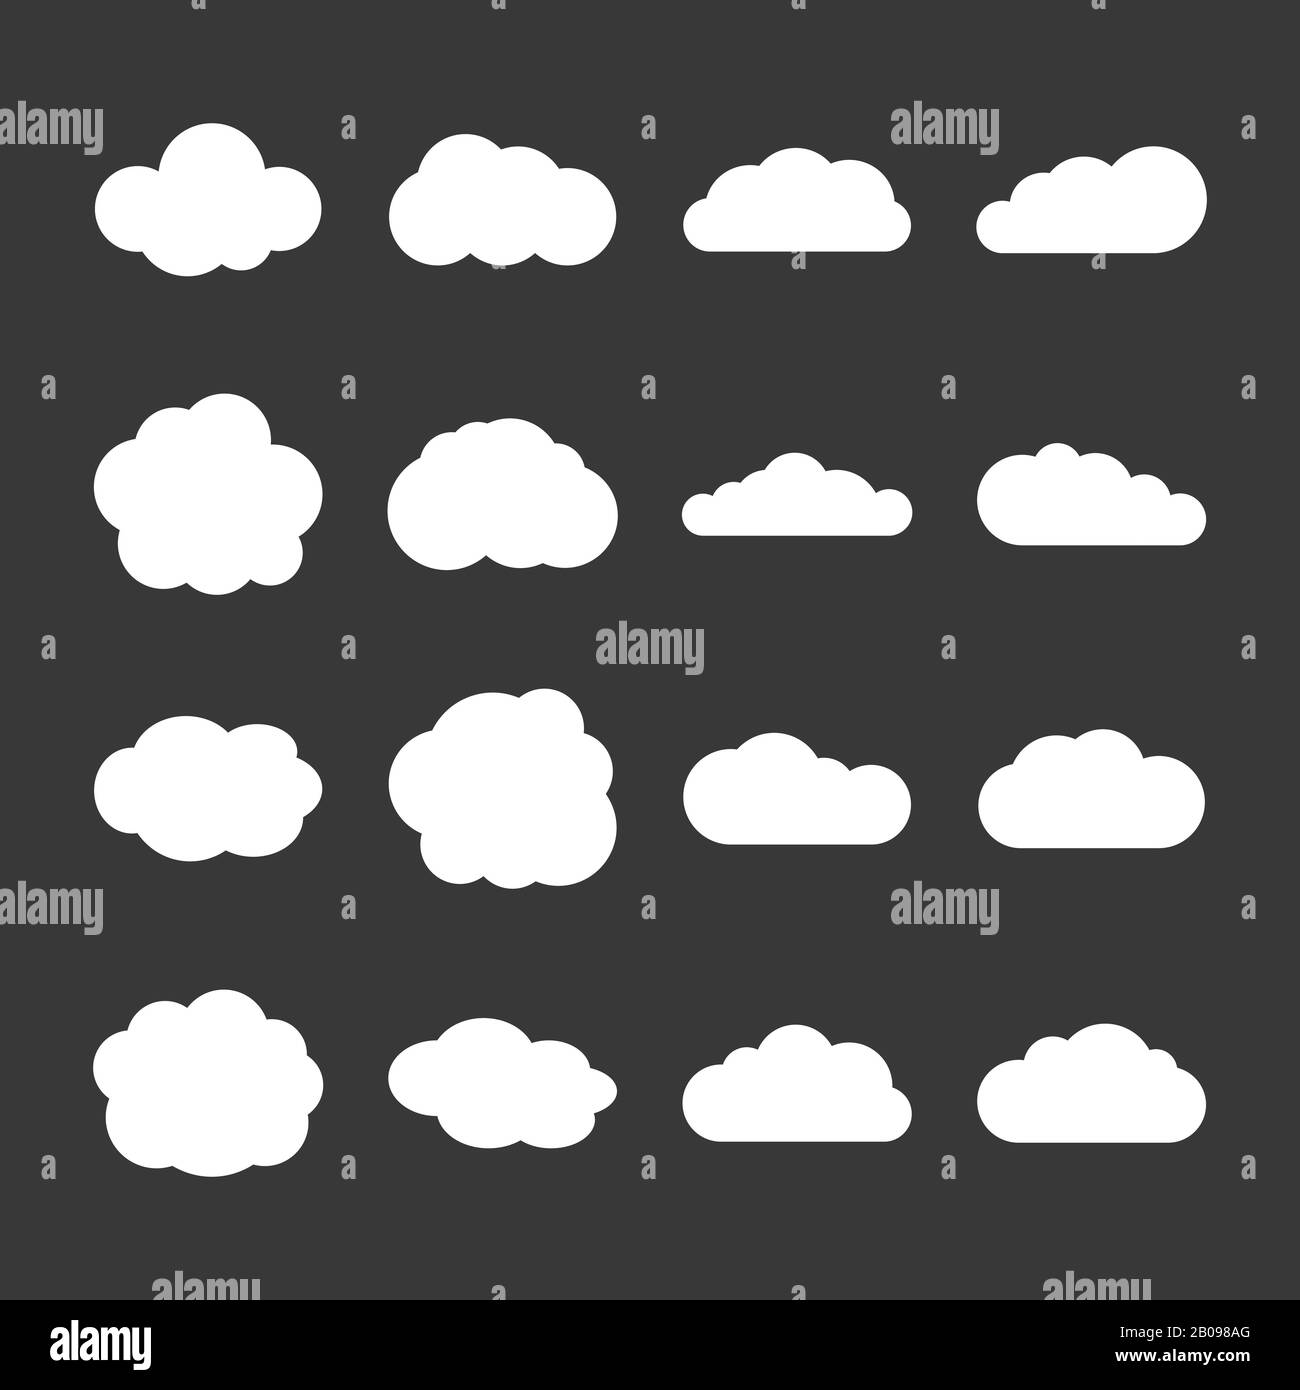 Vector clouds icons in white over gray. Set of elements white clouds illustration Stock Vector